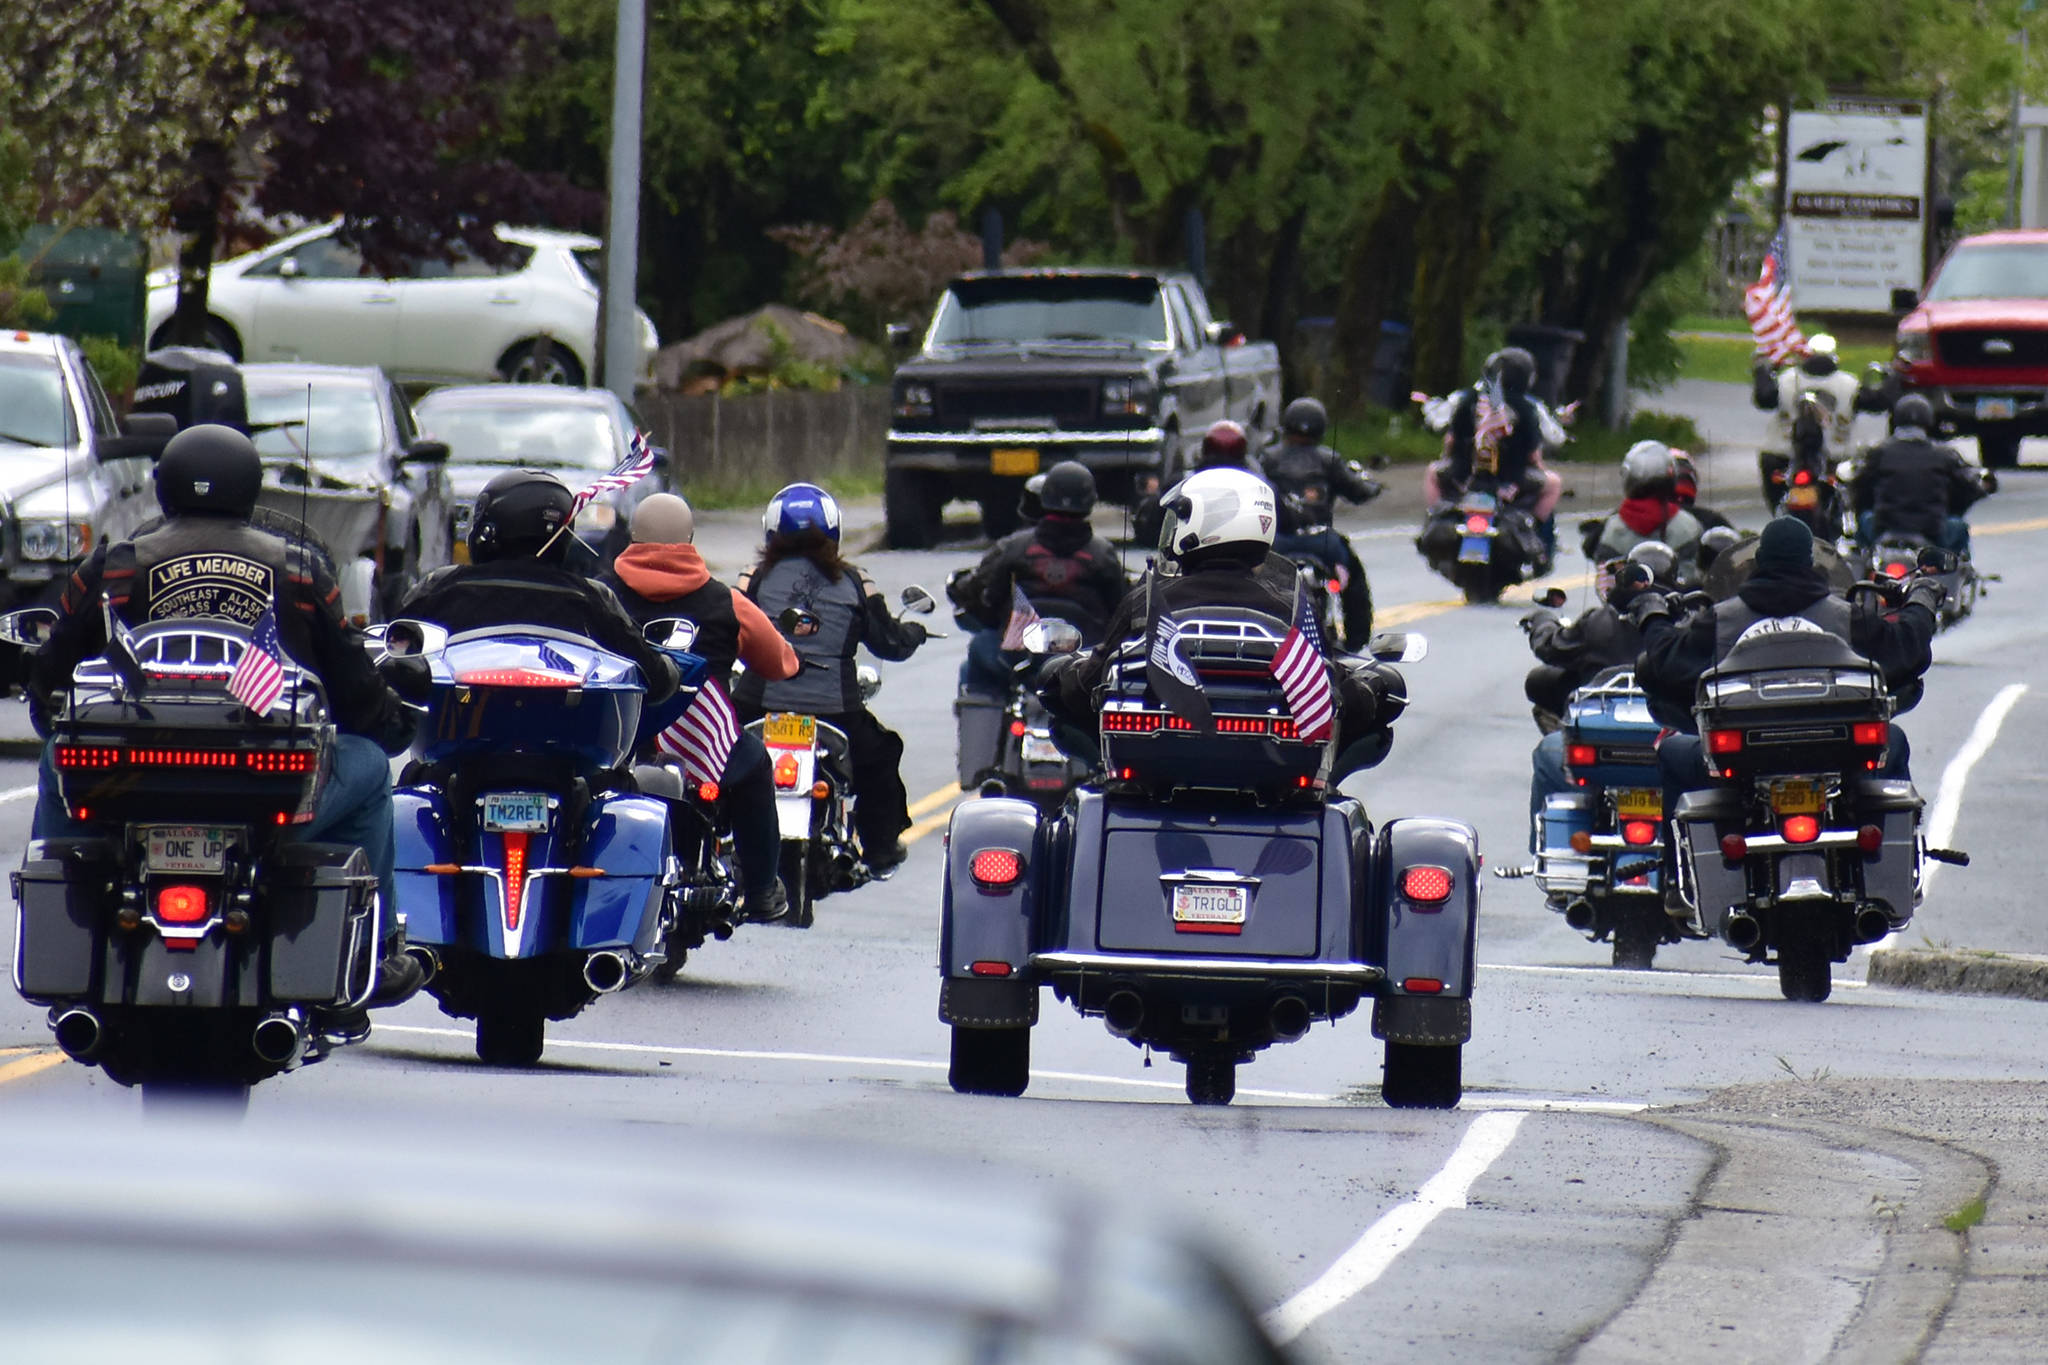 Riding through rain, bikers show support for fallen soldiers